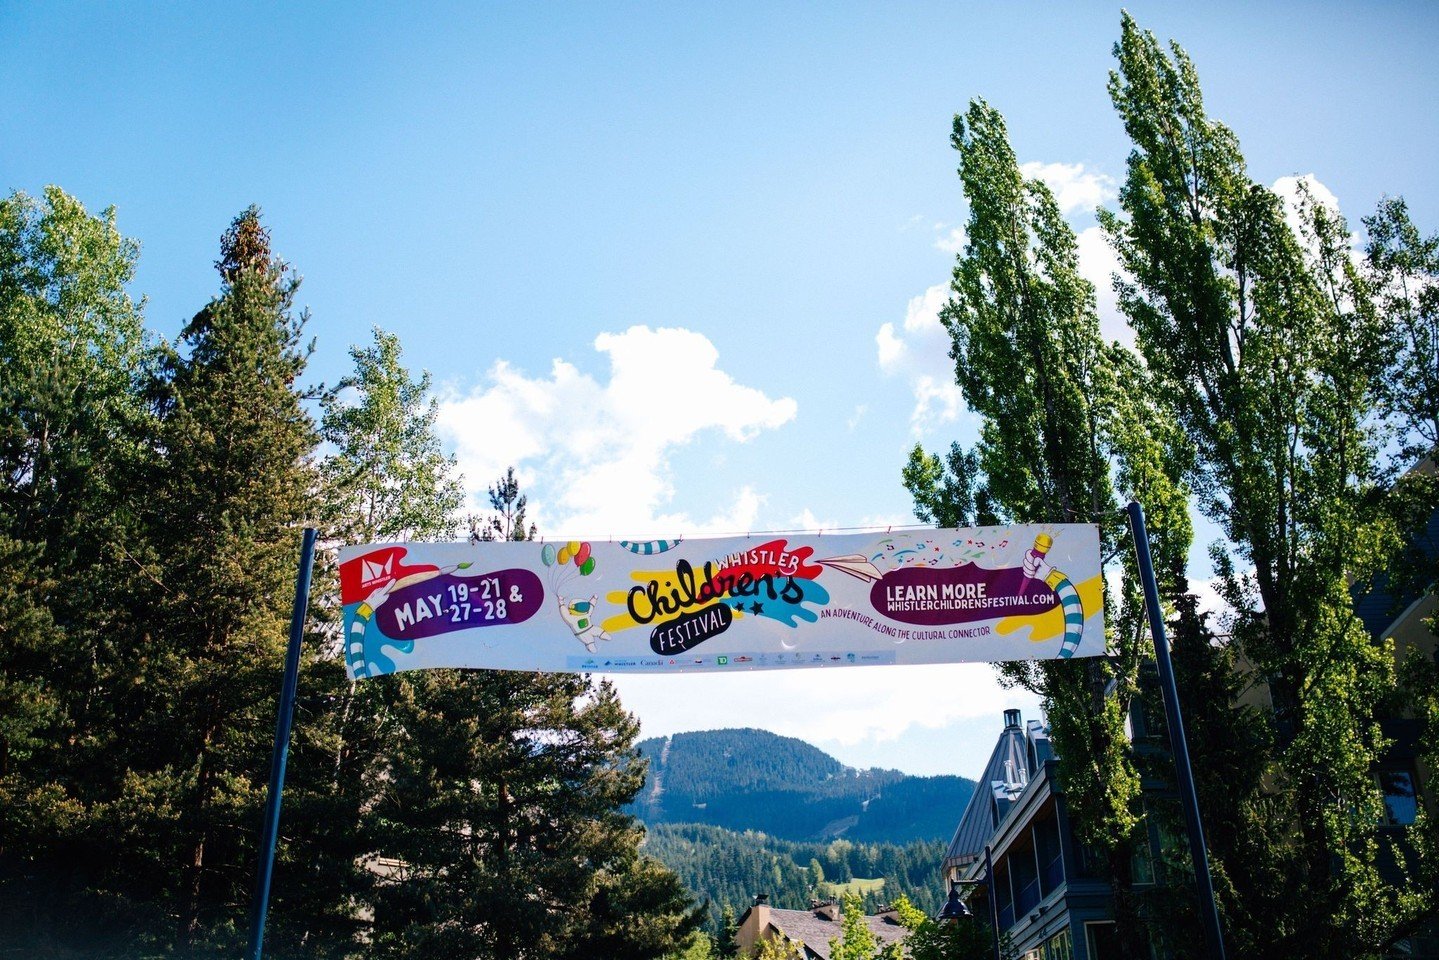 Fuelled by adventure, creativity, and giggles, Whistler&rsquo;s longest-running festival - the Whistler Children&rsquo;s Festival - is back for its 41st year! The Whistler Children&rsquo;s Festival promises adventure around every corner of Whistler&r